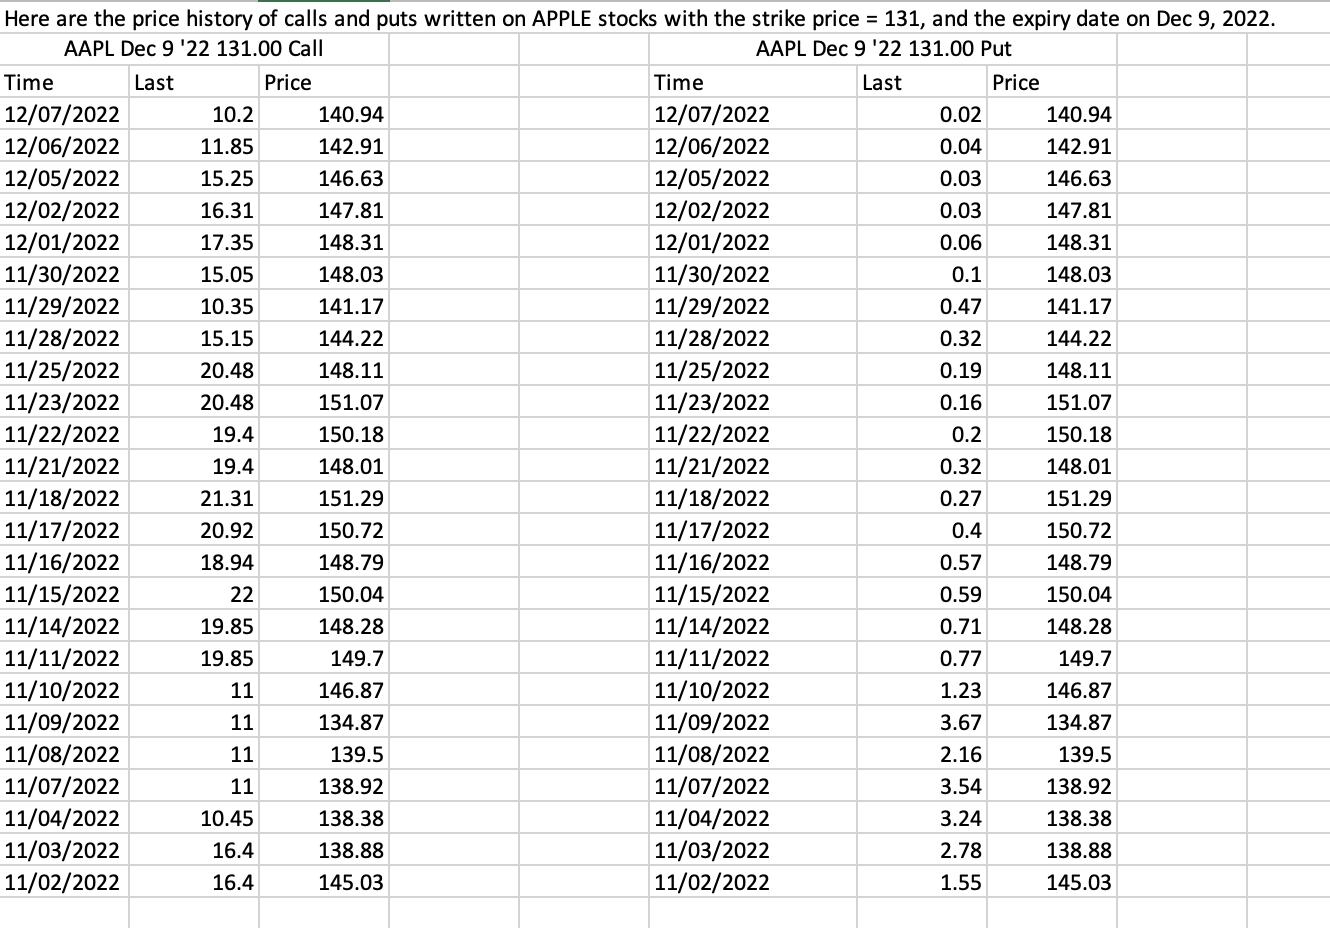 Here are the price history of calls and puts written on APPLE stocks with the strike price ( =131 ), and the expiry date on